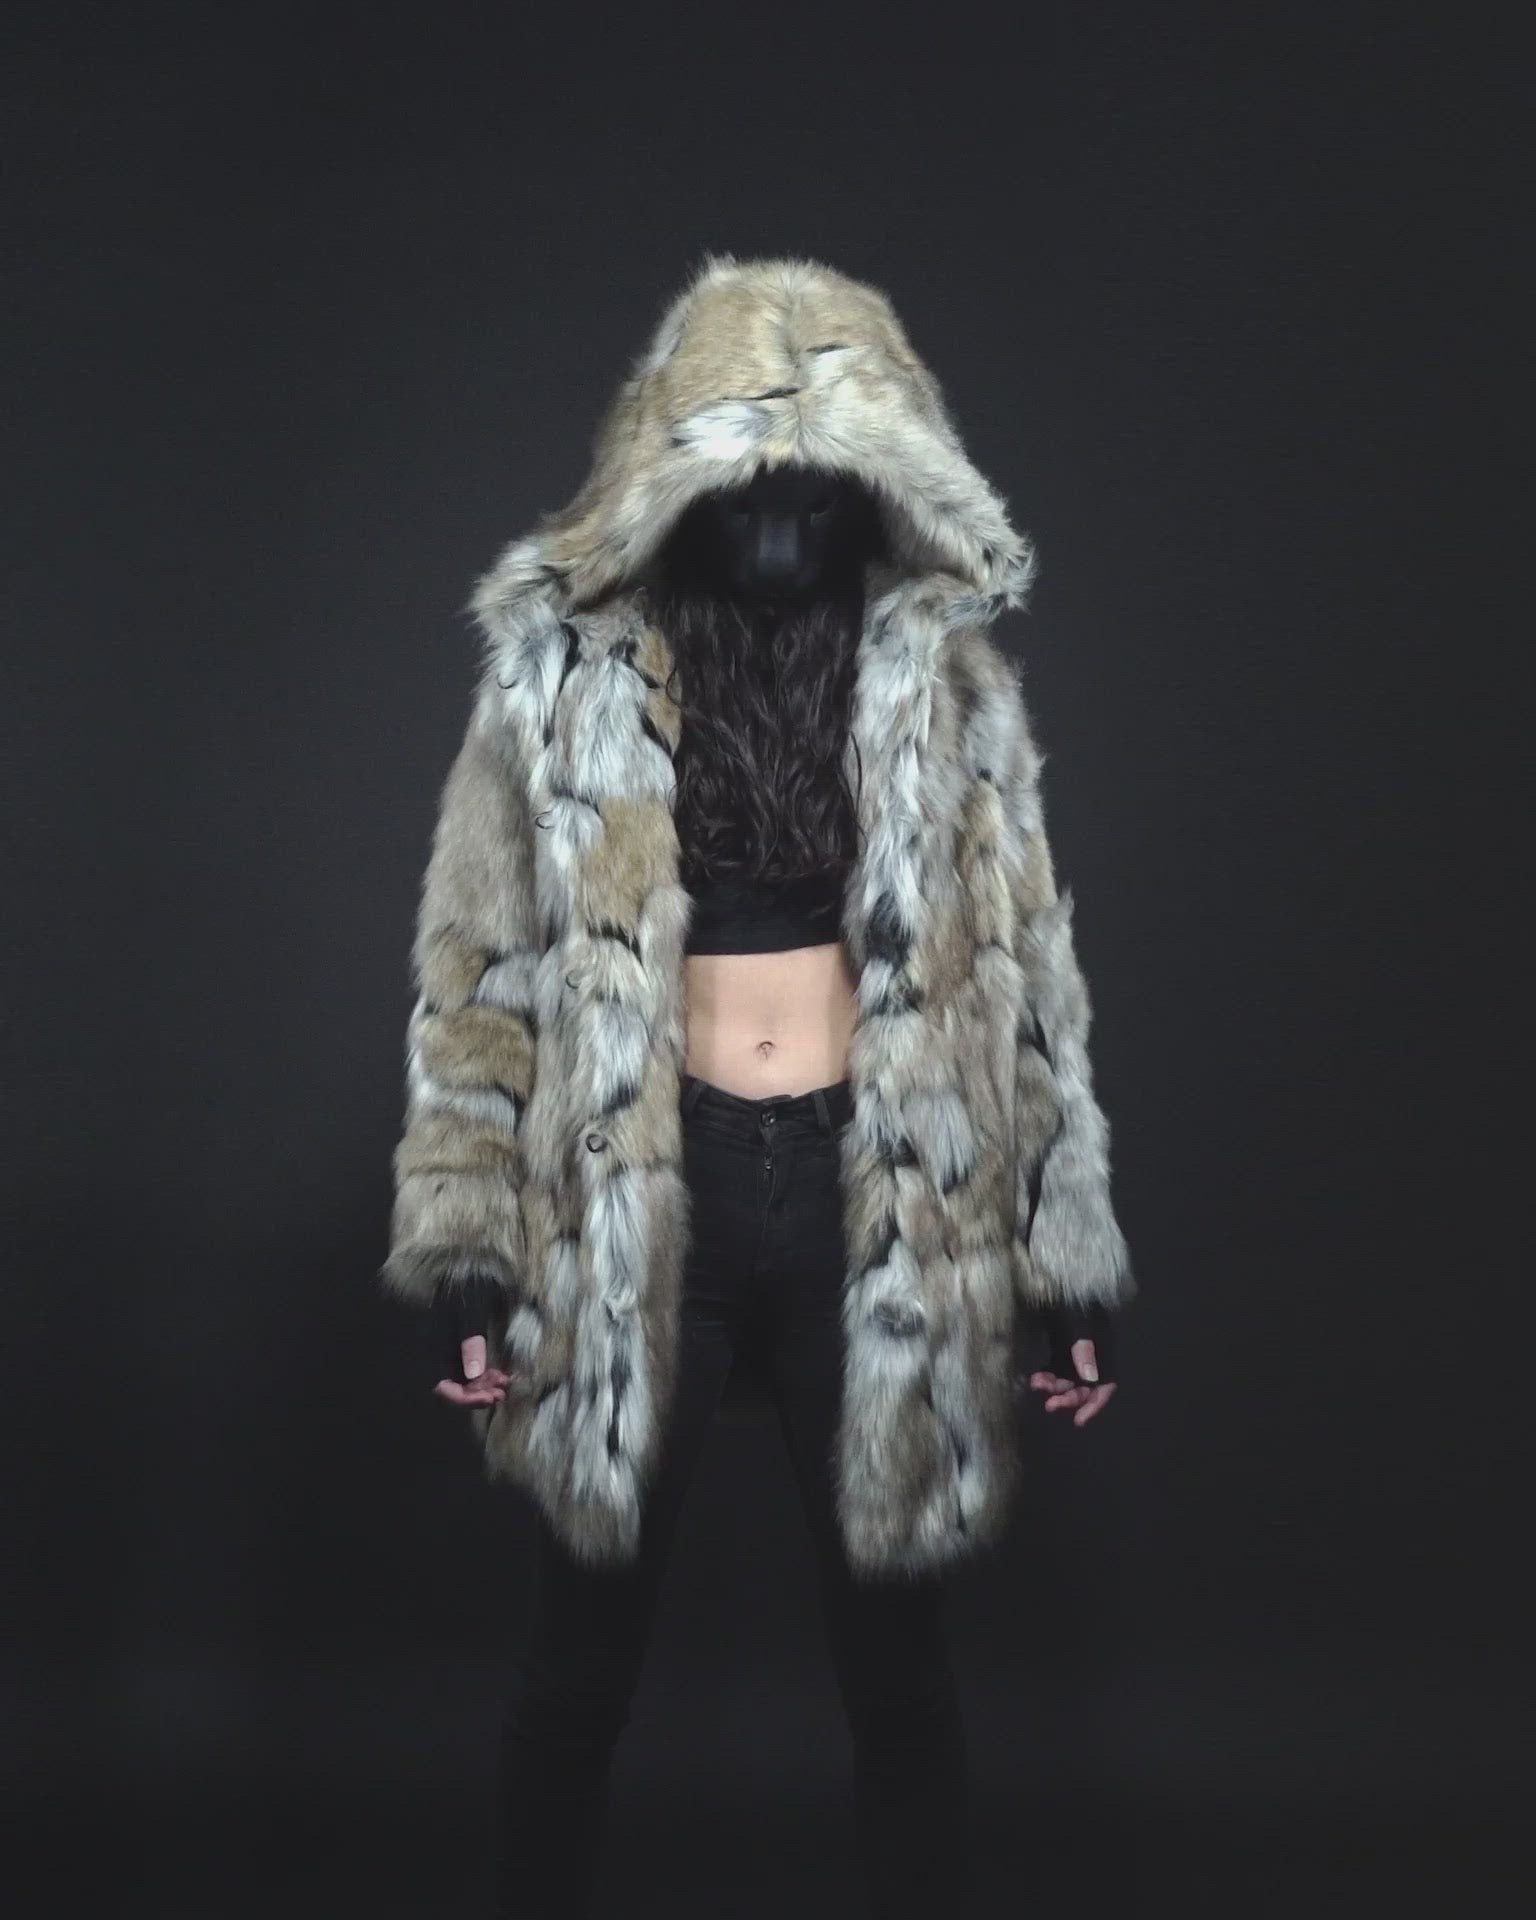 Video of Model in Mask Displaying Features of the Wolverine Hooded Faux Fur Coat for Women